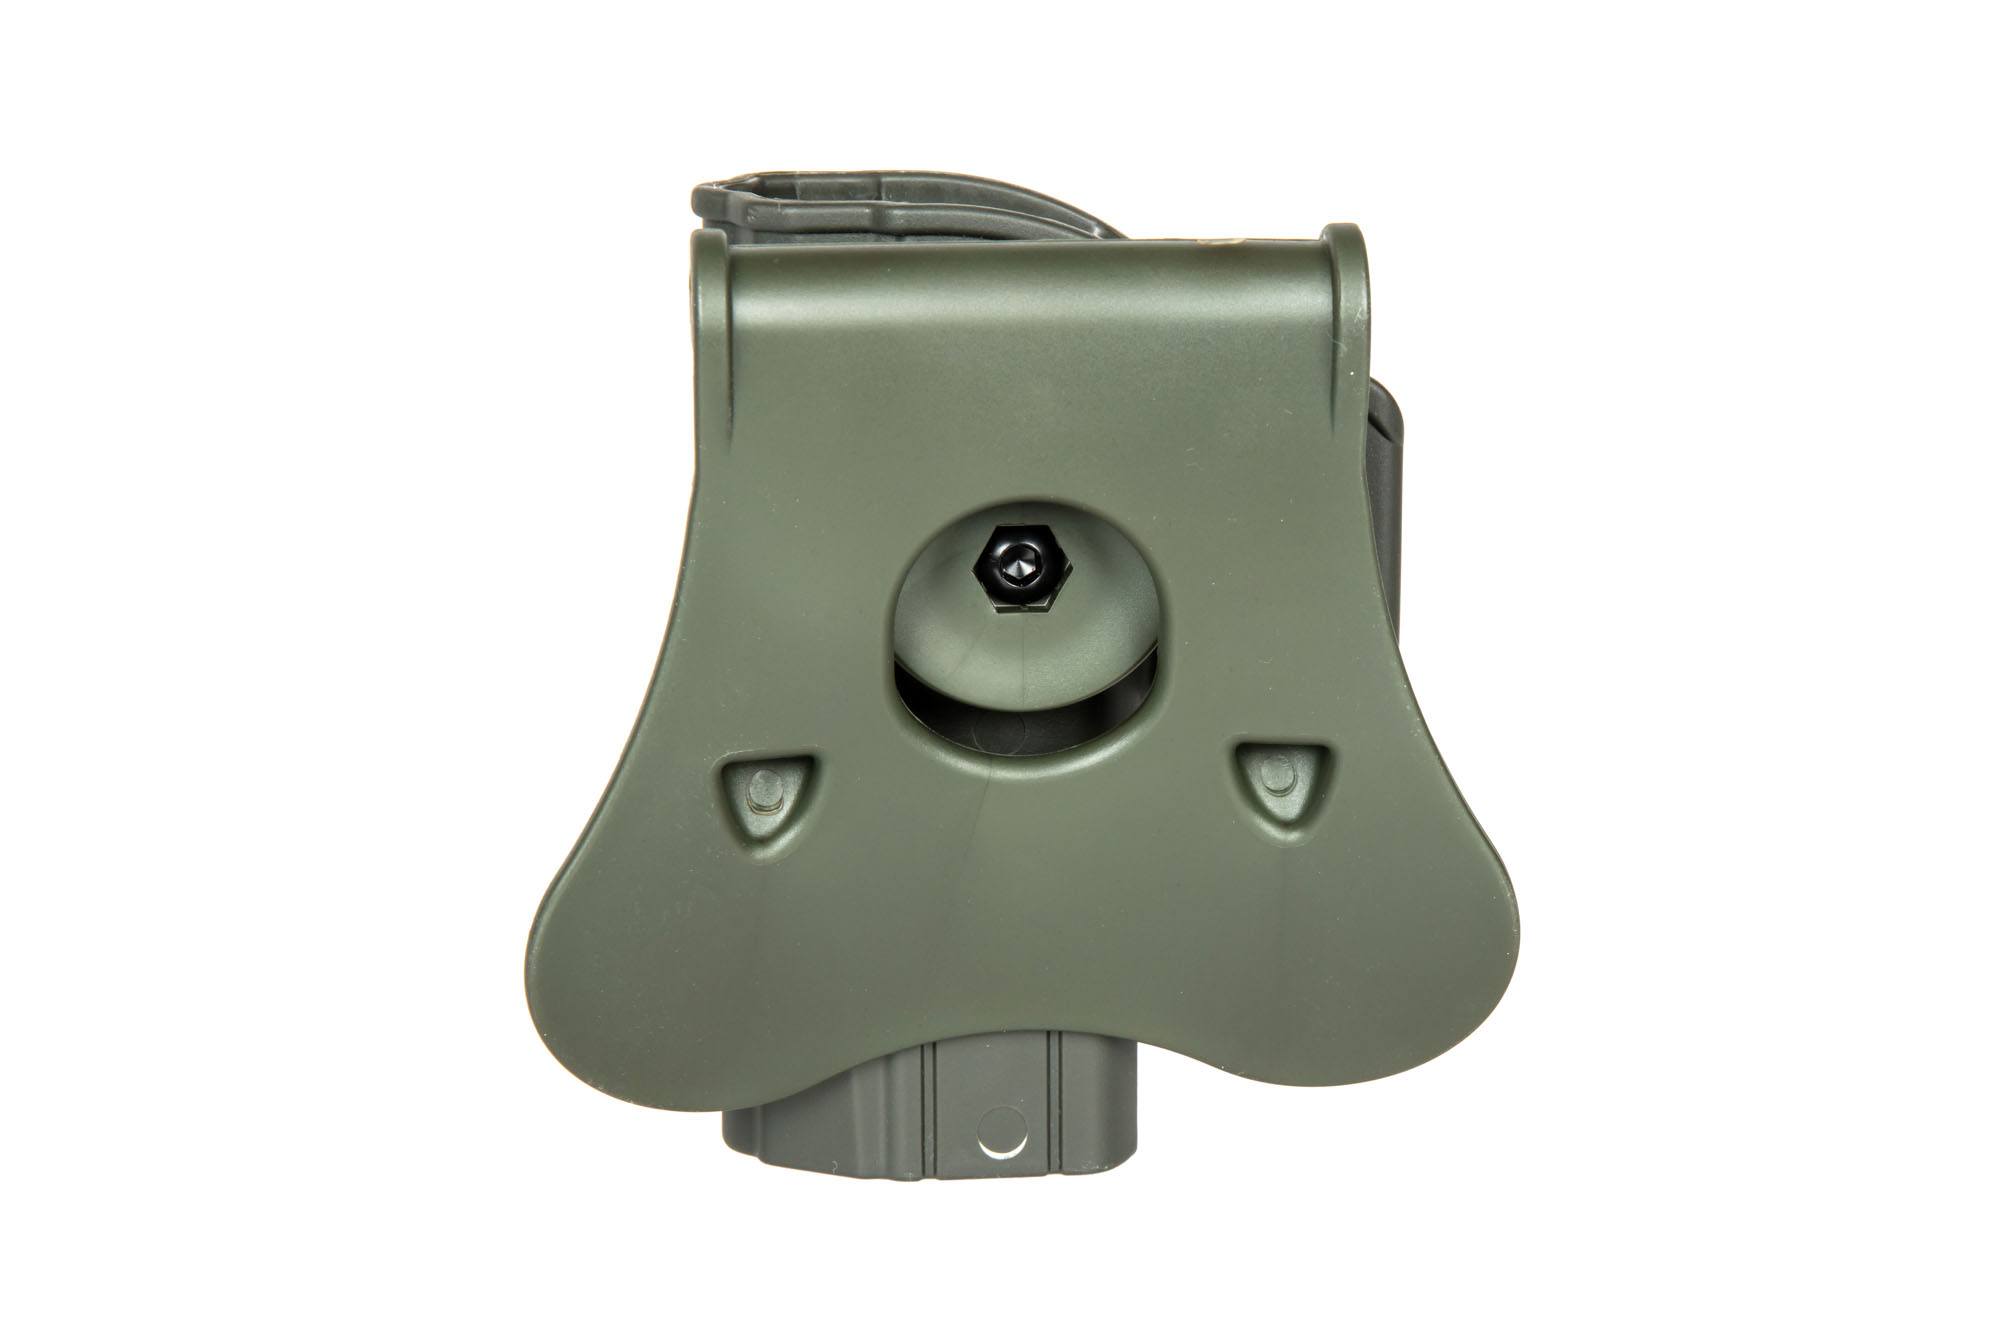 Per-Fit™ Holster For CZ P-07/P-09 - Olive